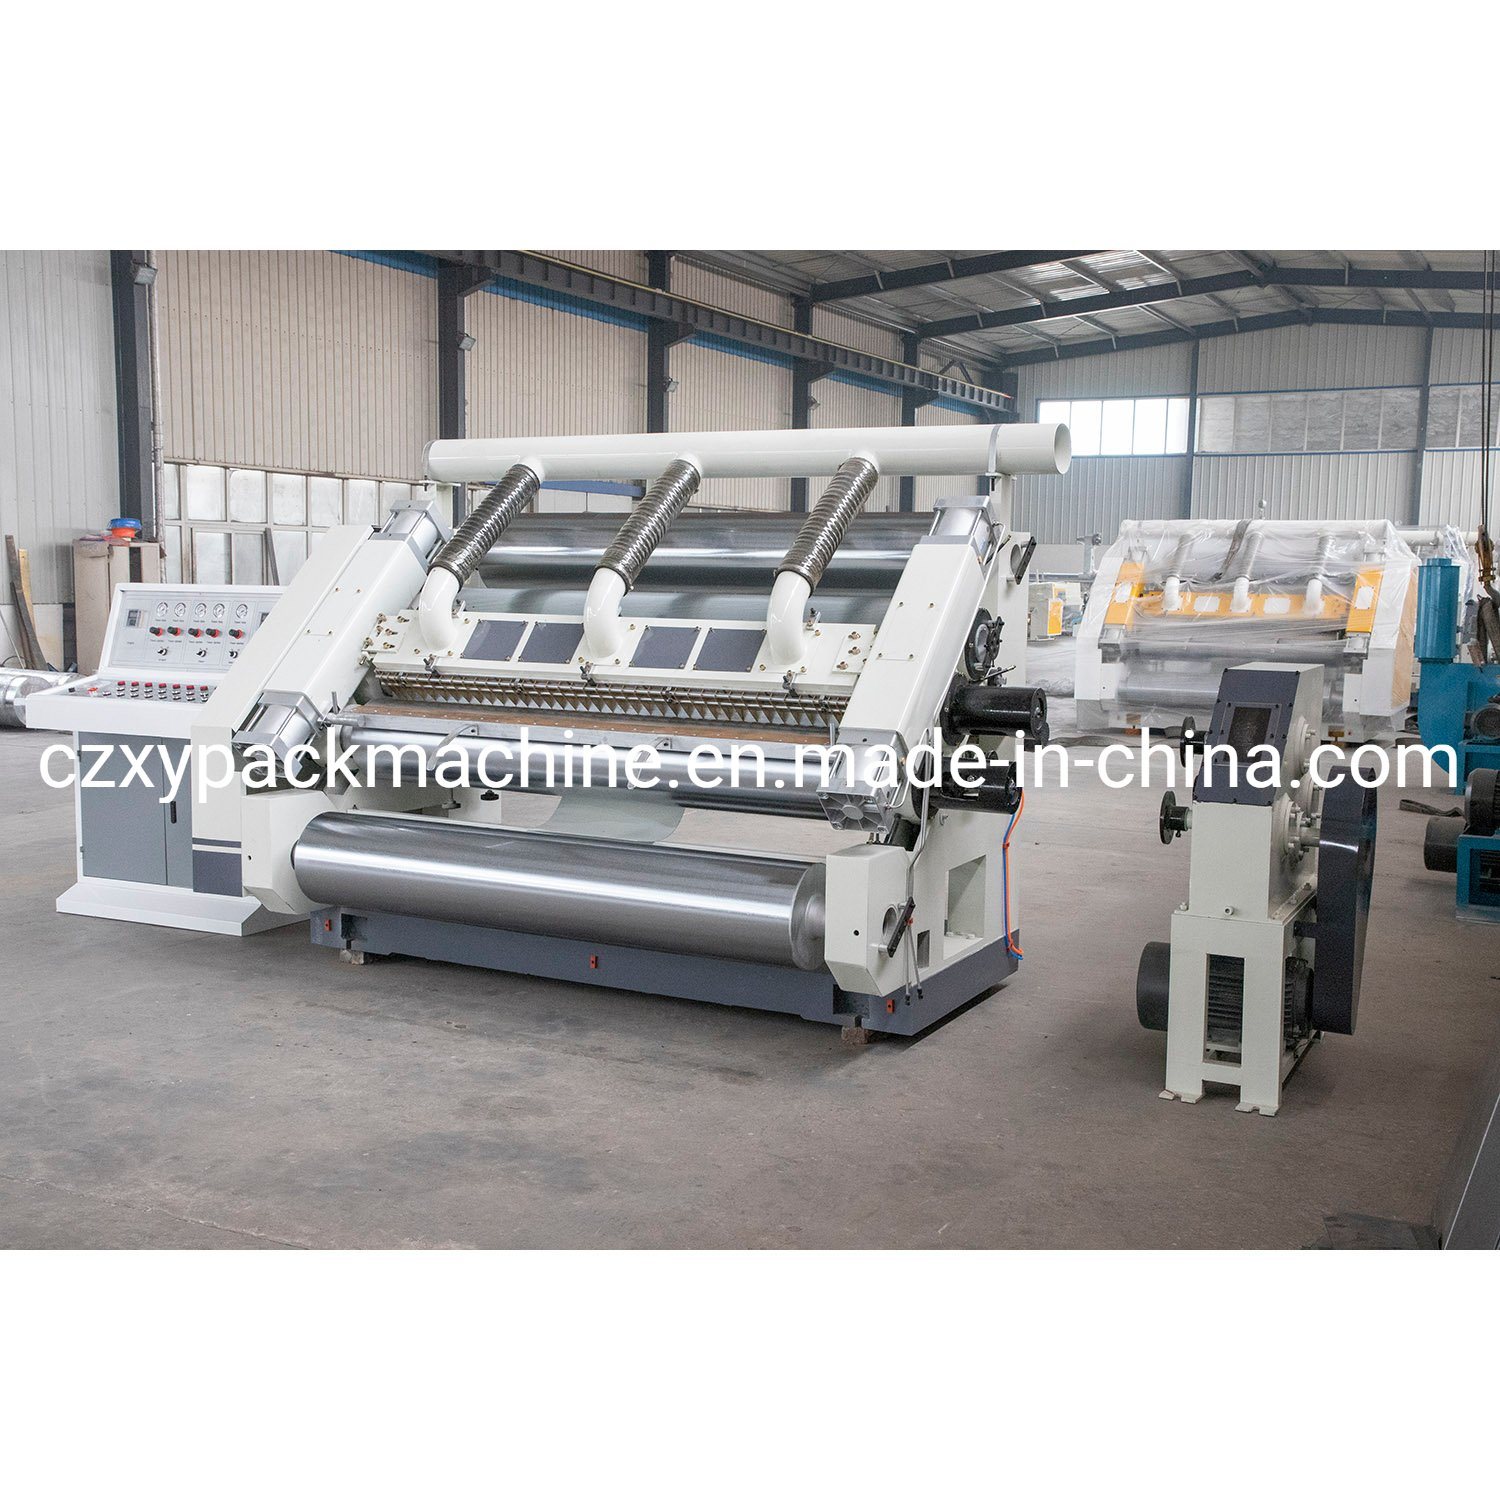 Carton Single Facer Machine for Wholesales with Low Price and Better Quality